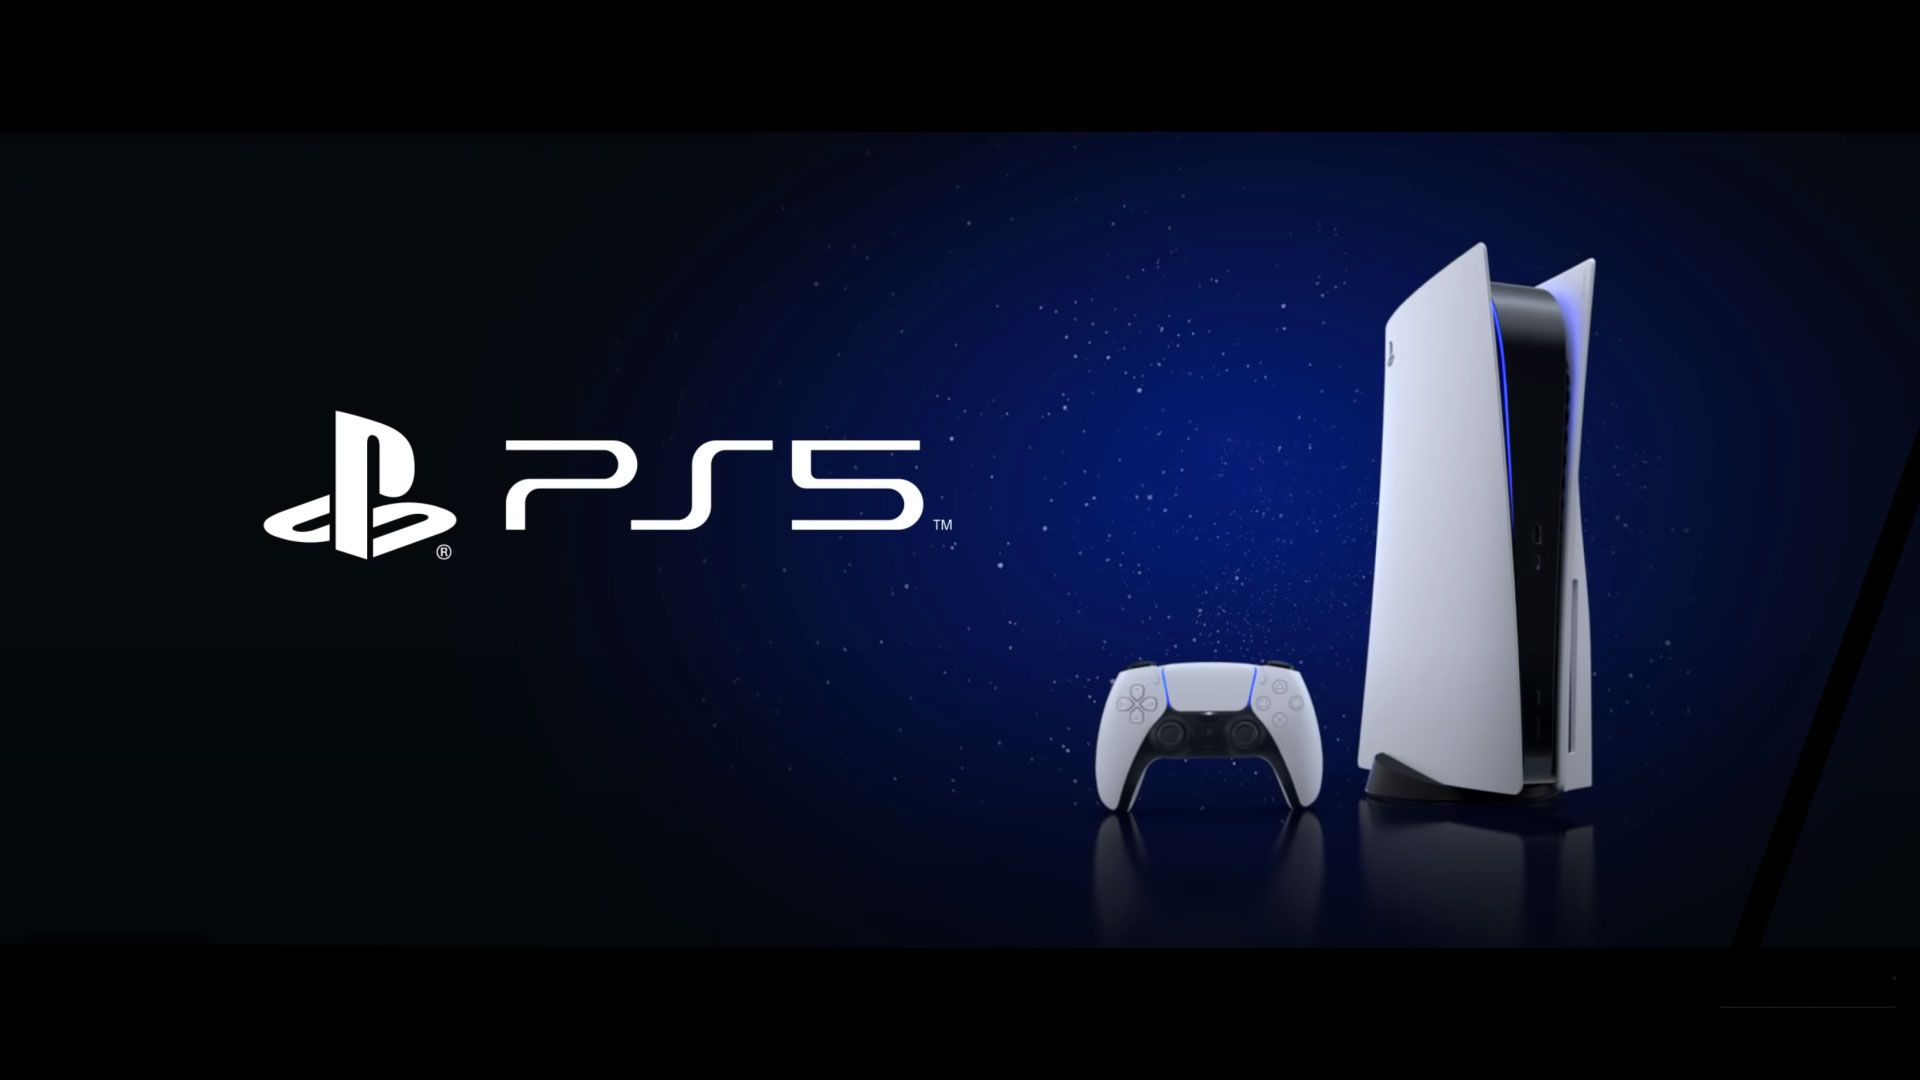 PS5 just had the biggest PlayStation console launch ever, Sony confirms Freaks 365